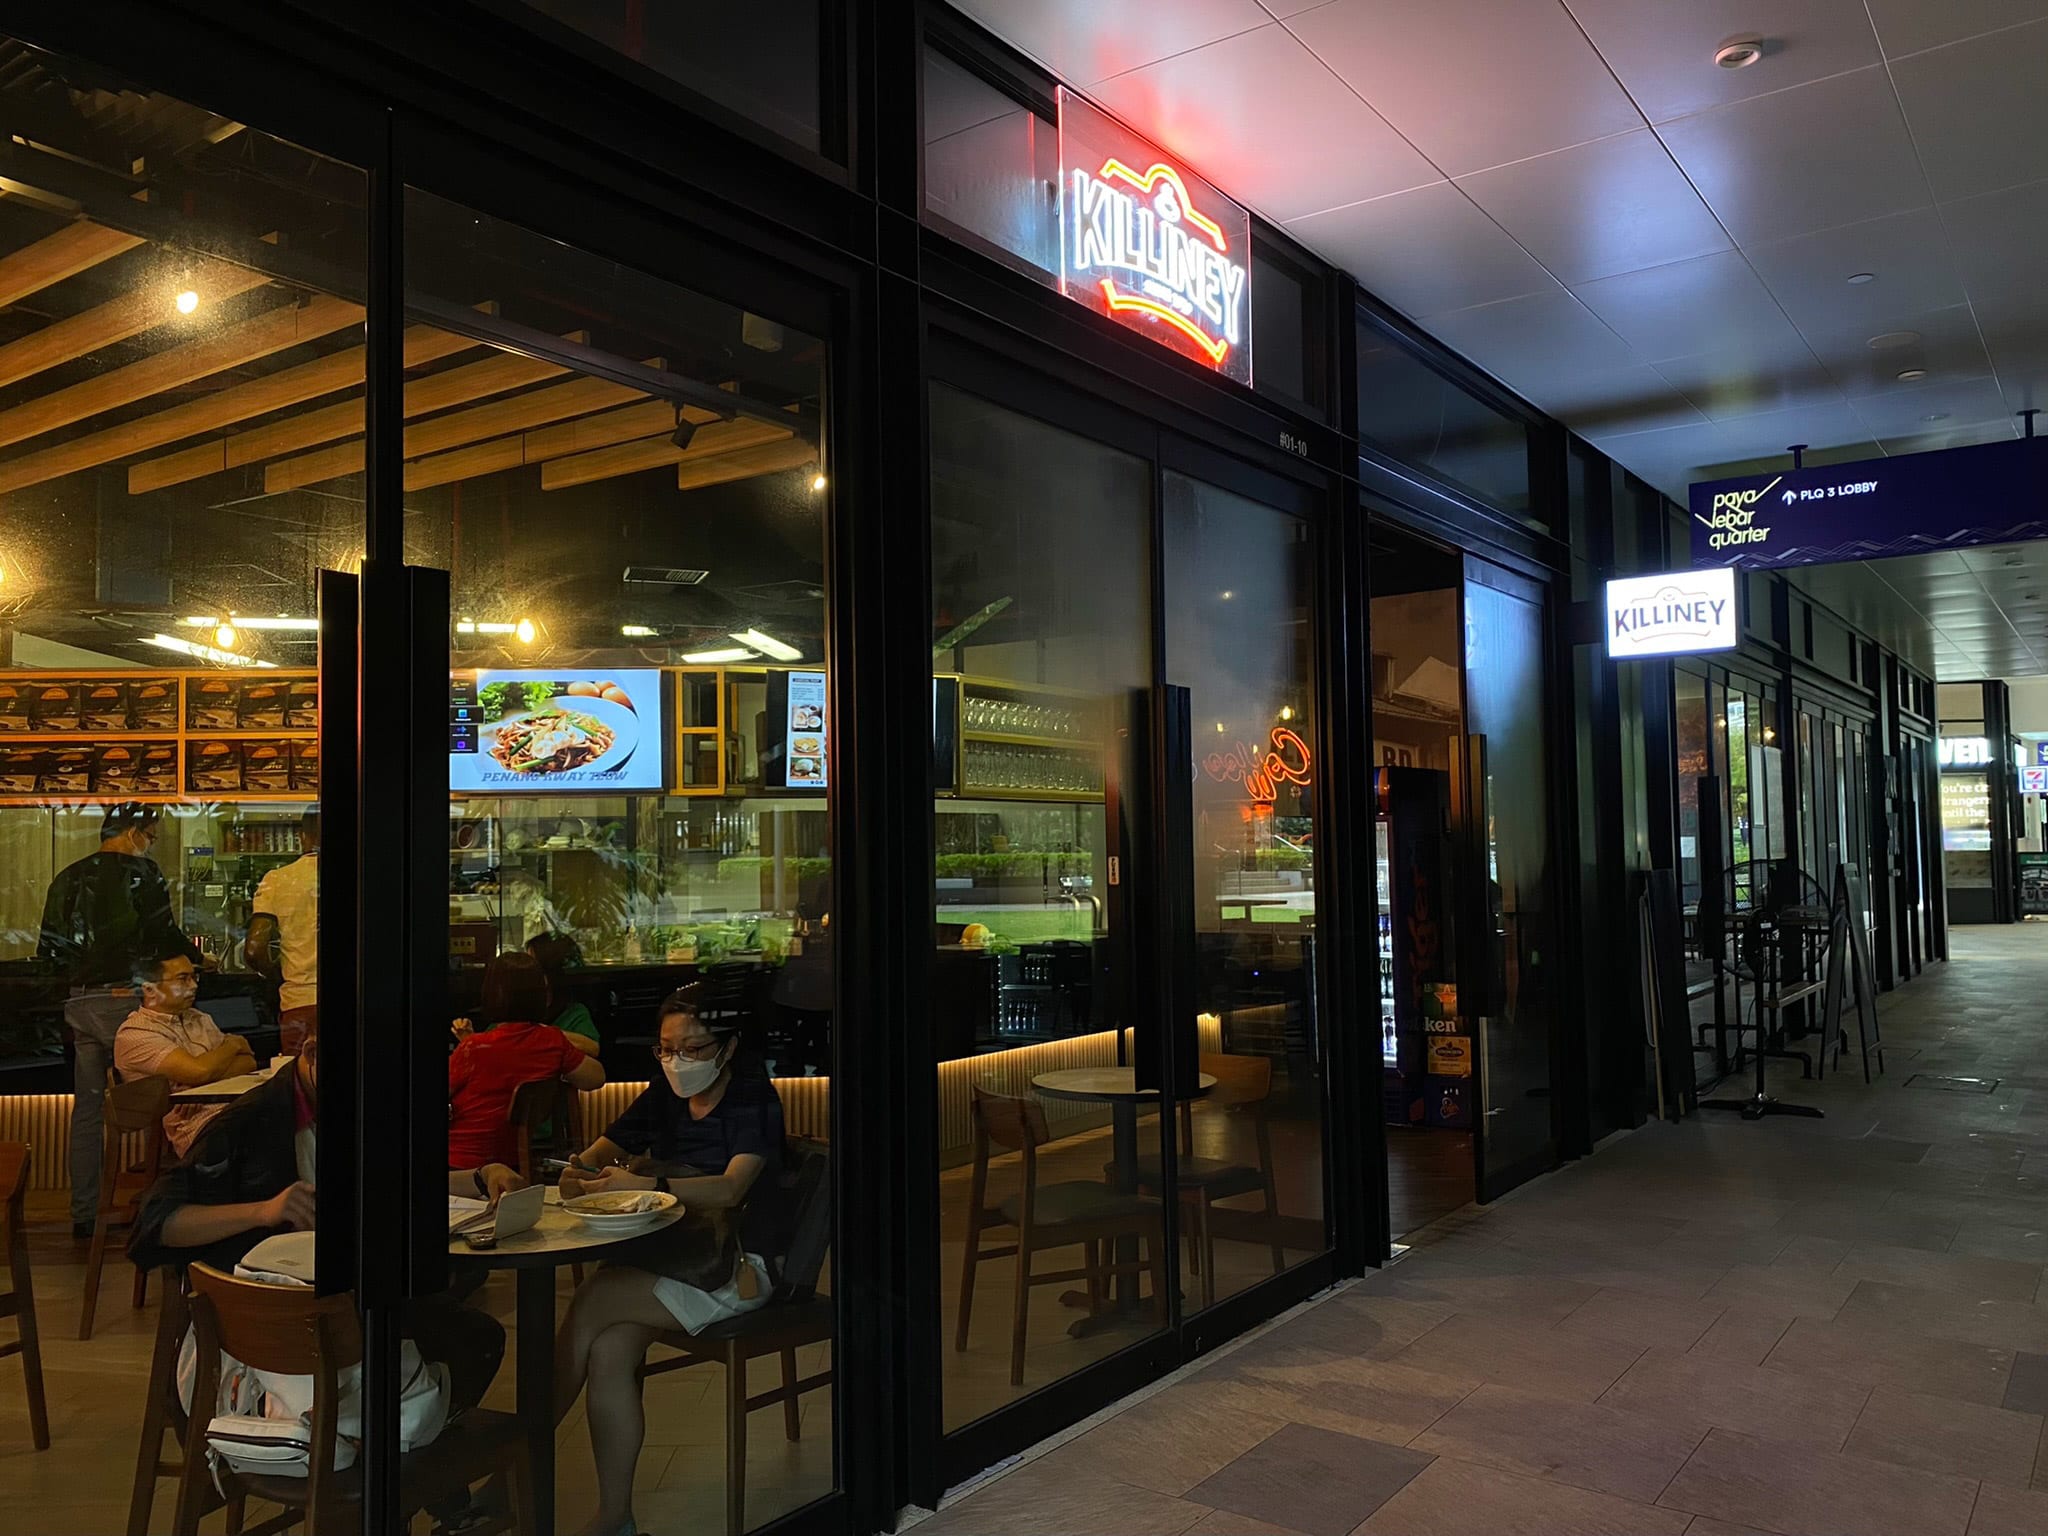 This Killiney Kopitiam Outlet Offers Wine, Gin & Beer With Kaya Toast ...